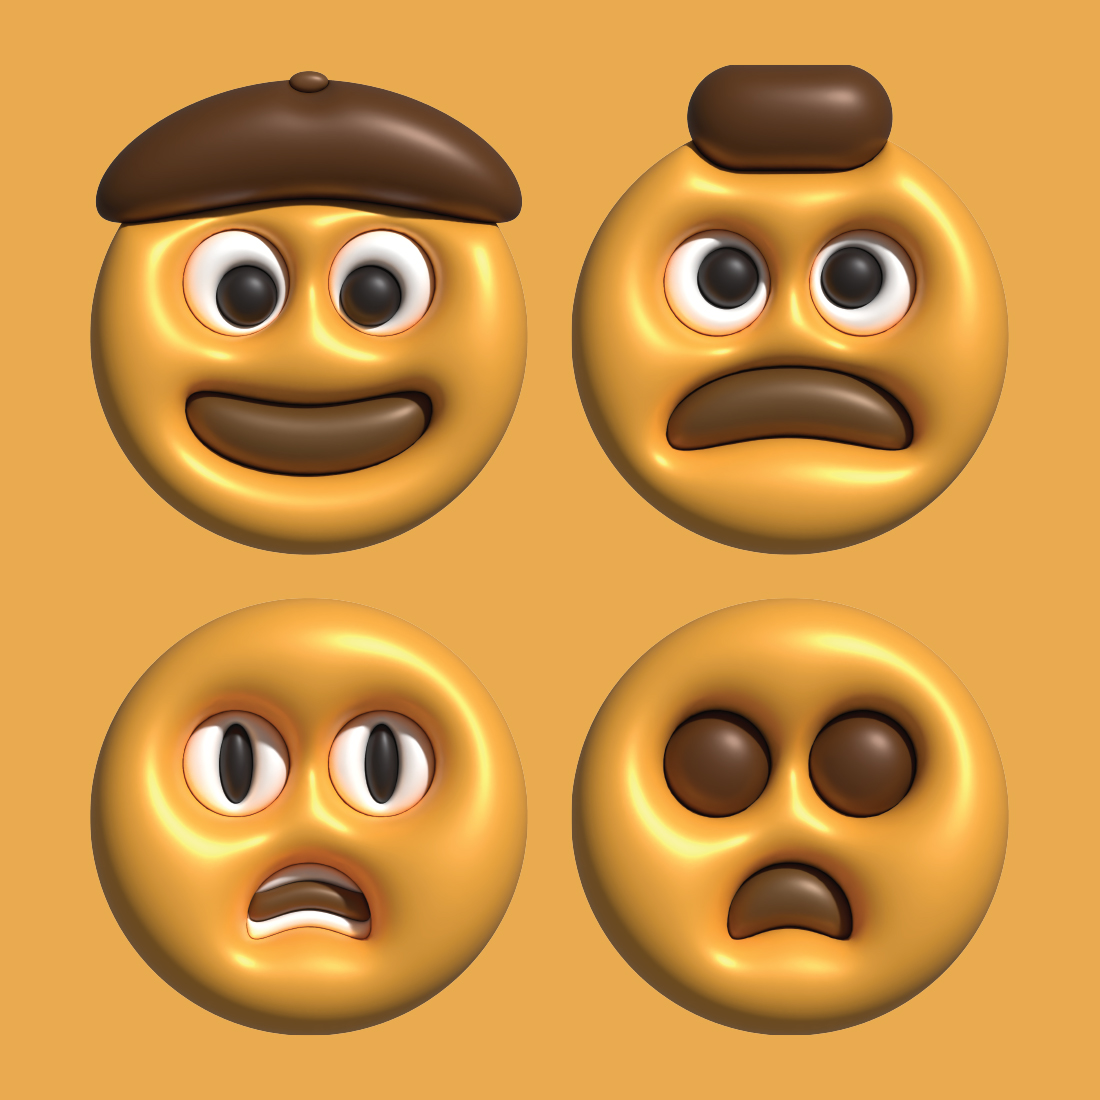 Set of four emoticions with different facial expressions.